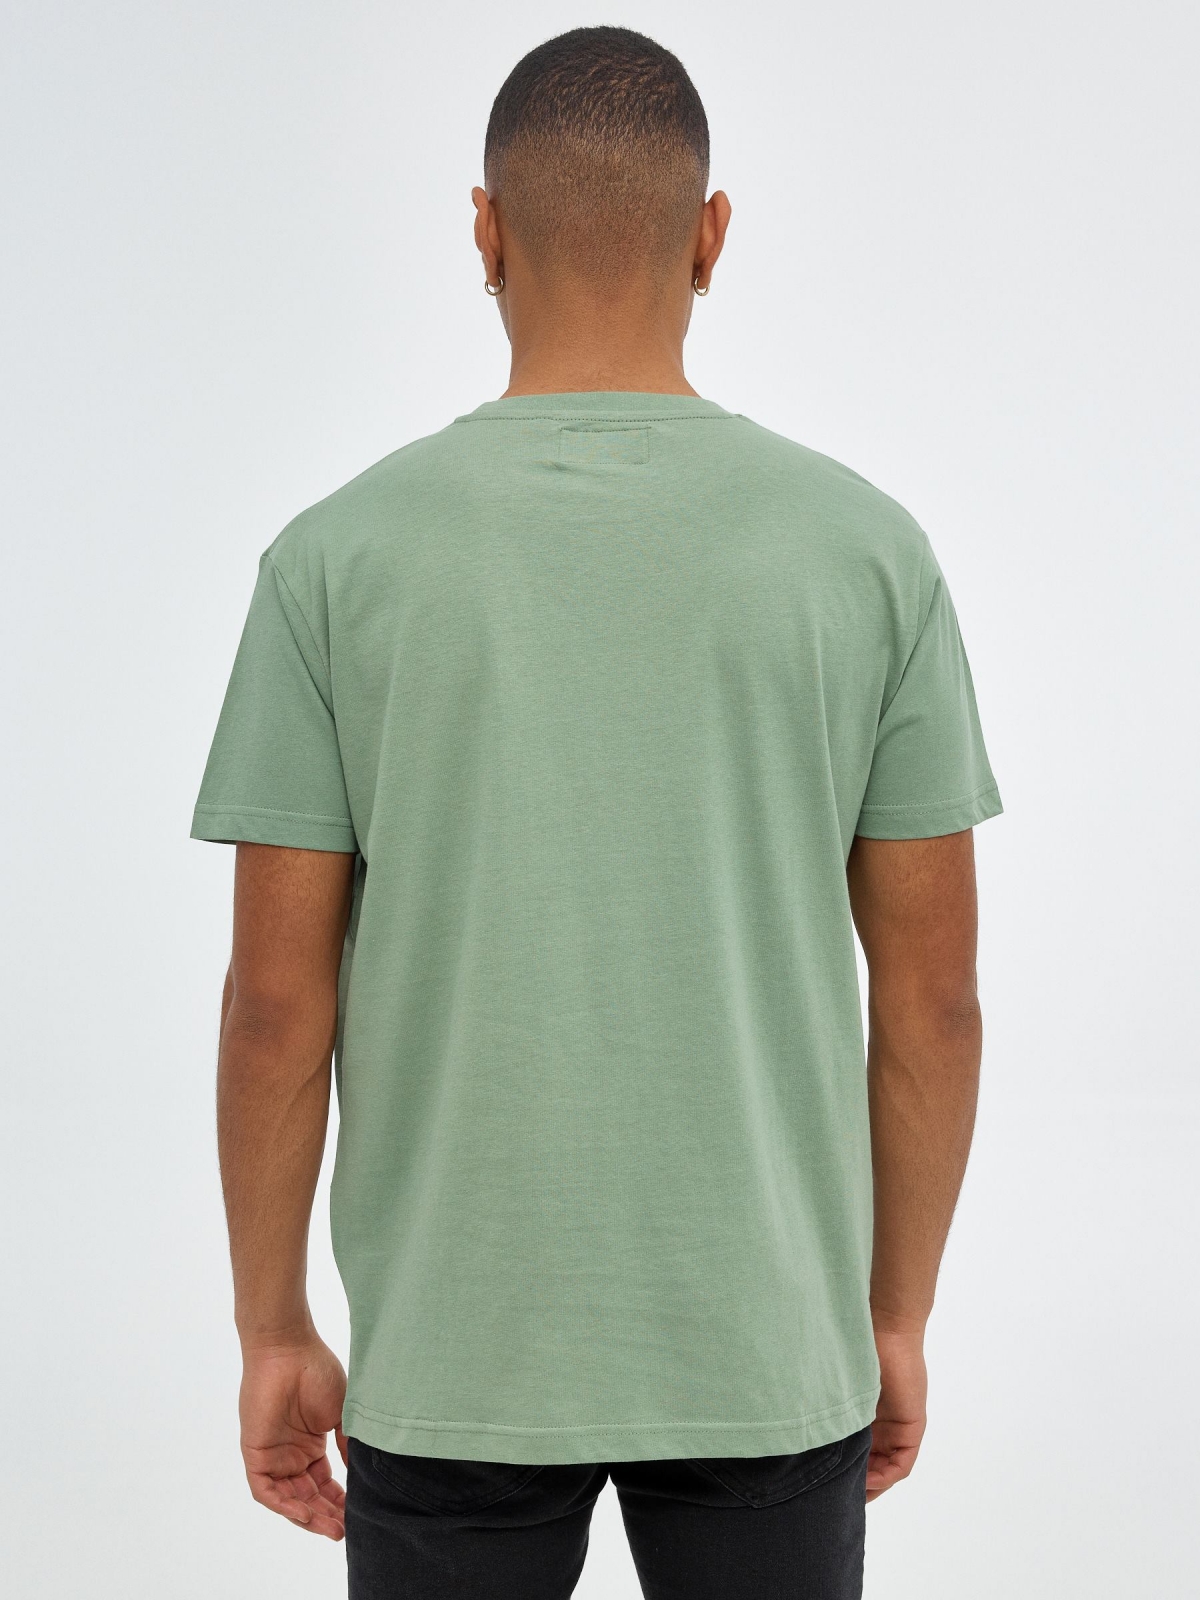 Graphic T-shirt with pocket olive green middle back view